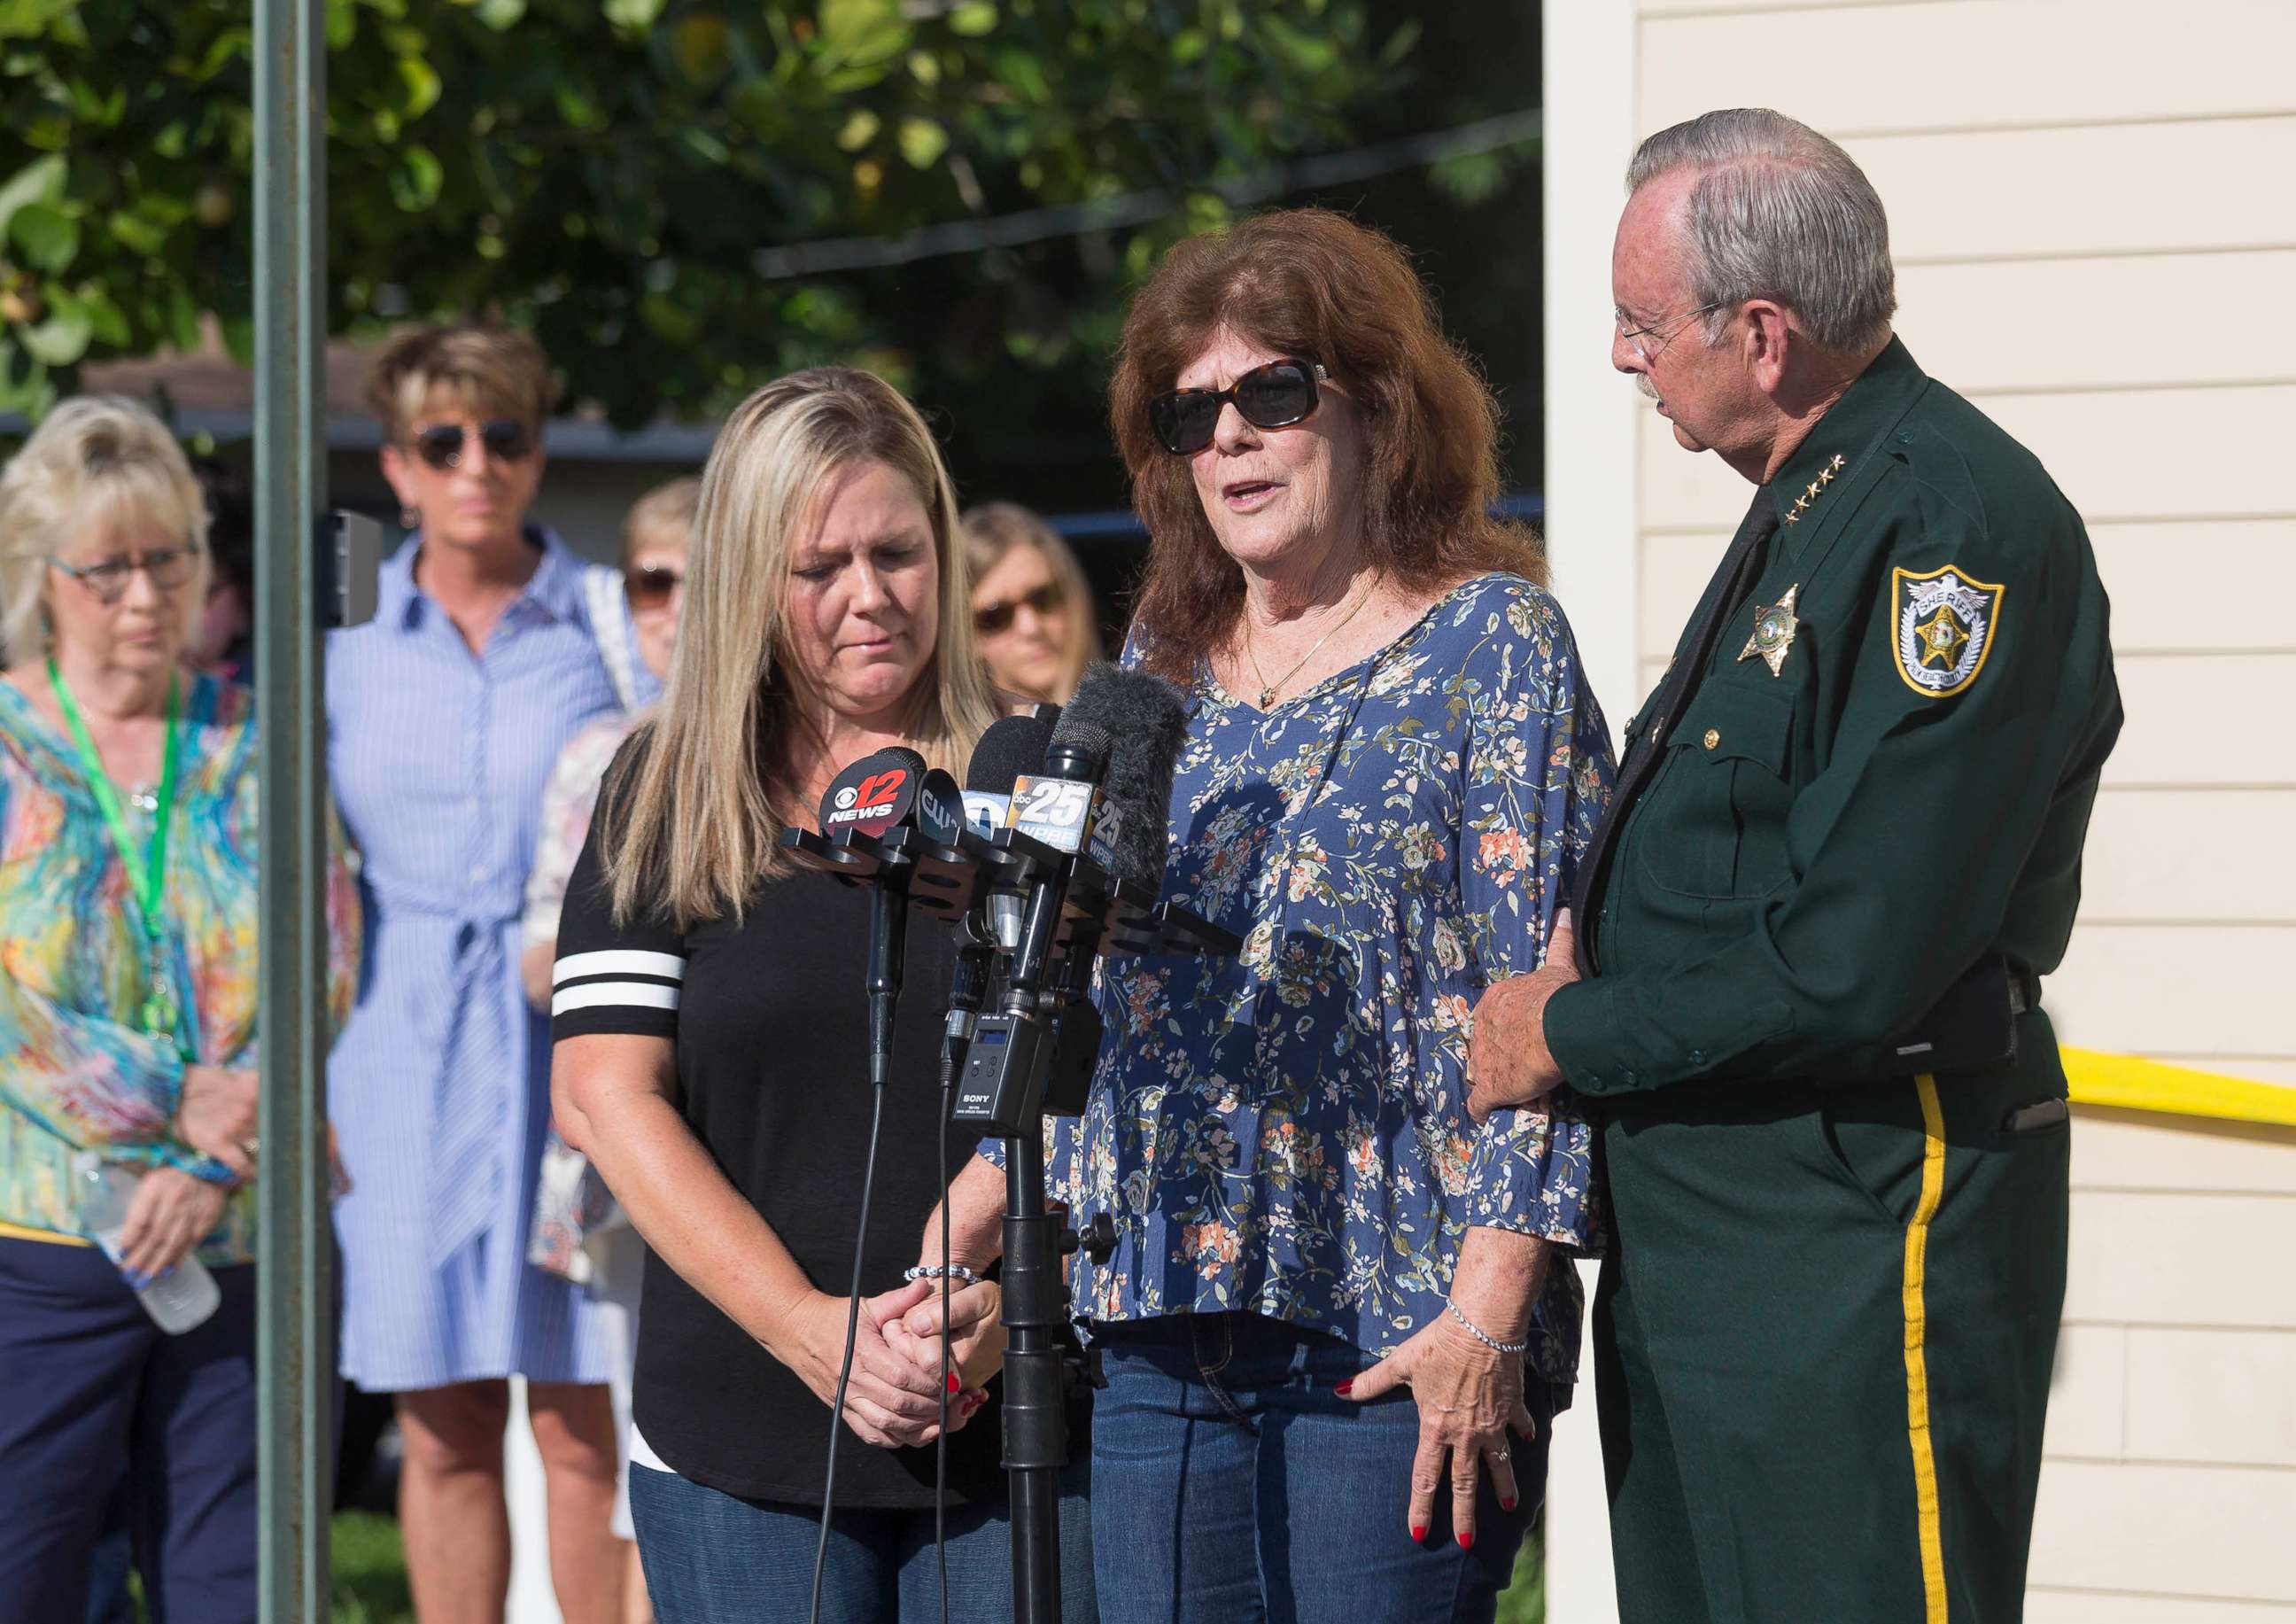 PHOTO: Jennie Johnson, center, talks to the media next to Sheriff Ric Bradshaw after a new lead in the investigation to find her missing daughter, Christy Luna, who disappeared from Greenacres more than 35 years ago, August 5, 2019.